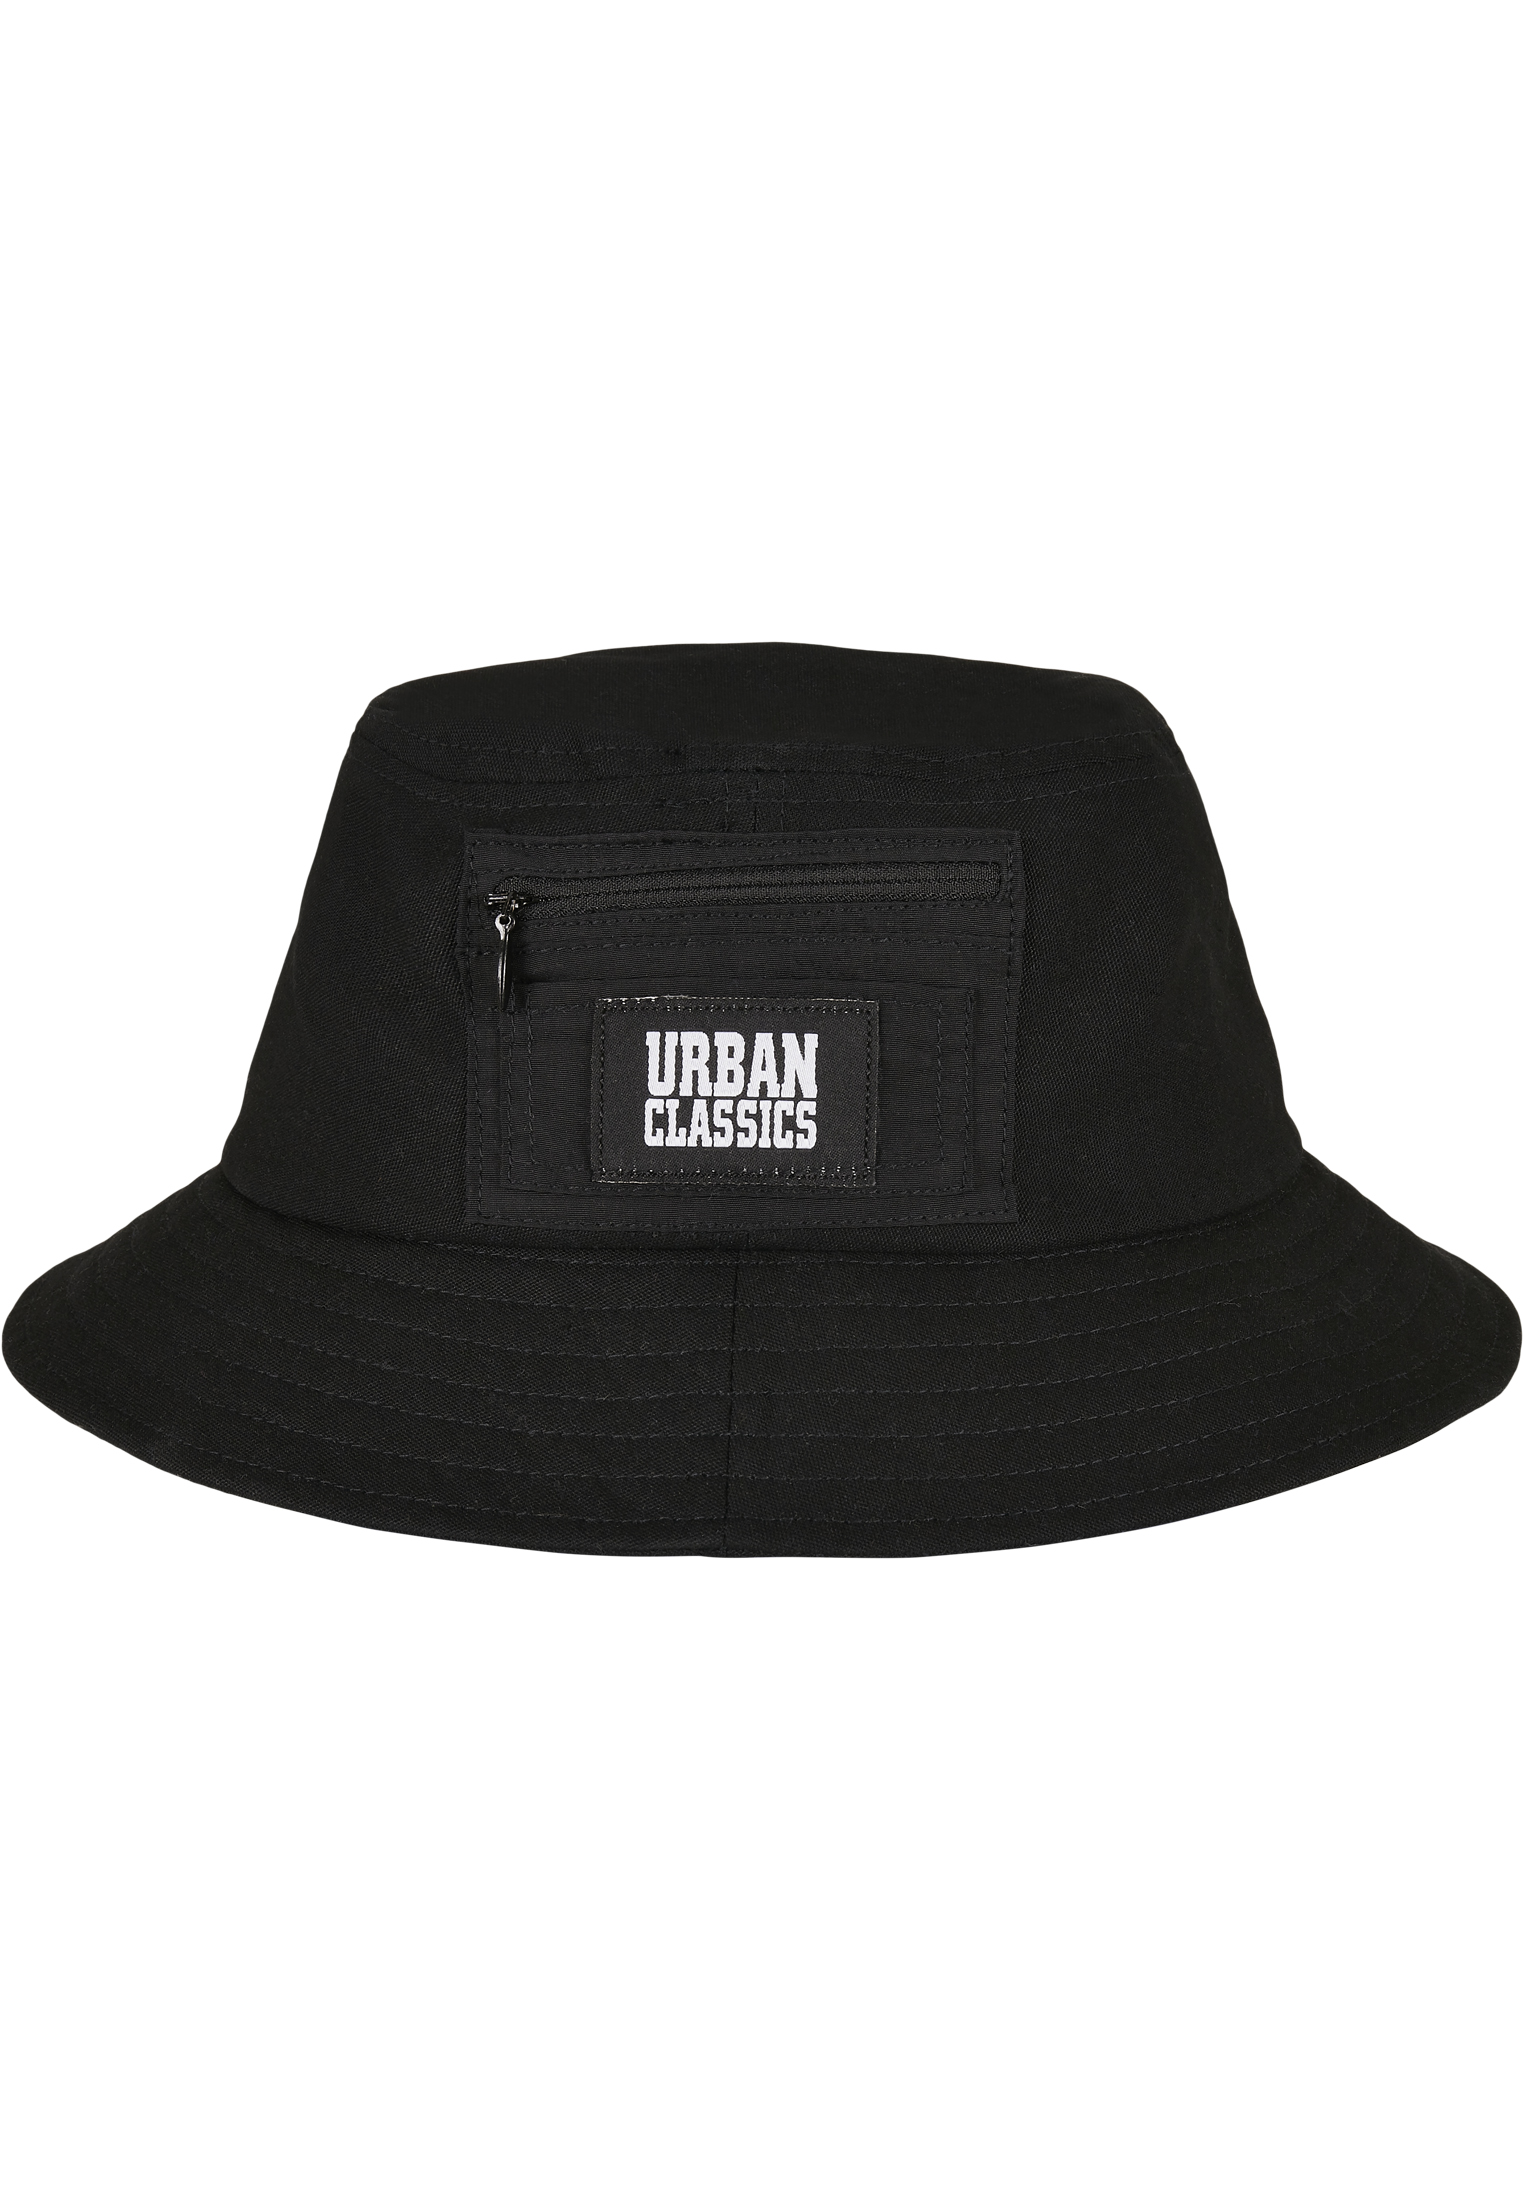 Bucket with logo on canvas black